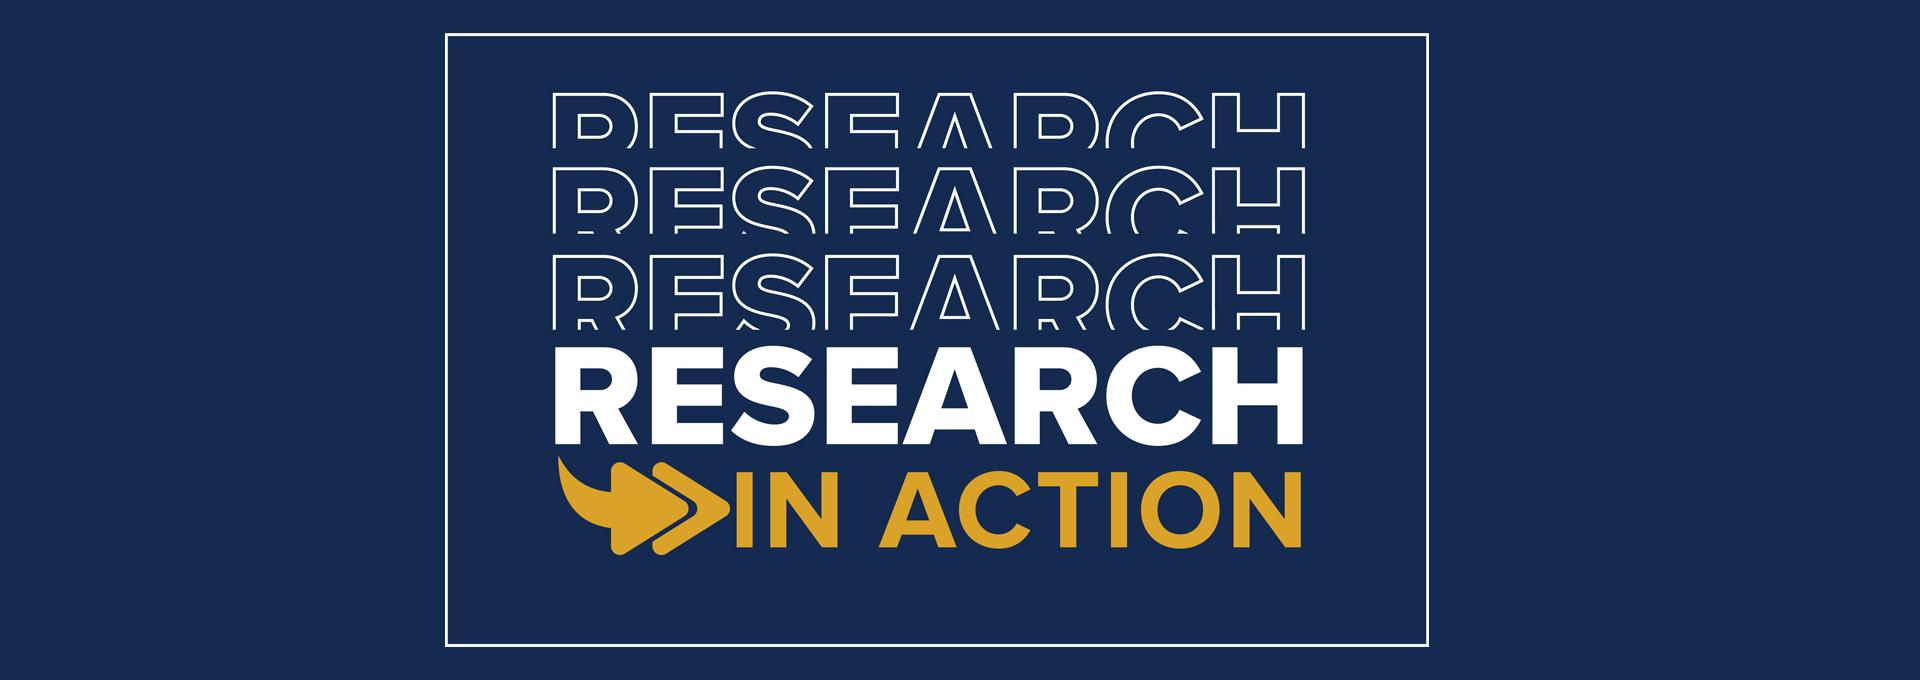 Research in Action logo